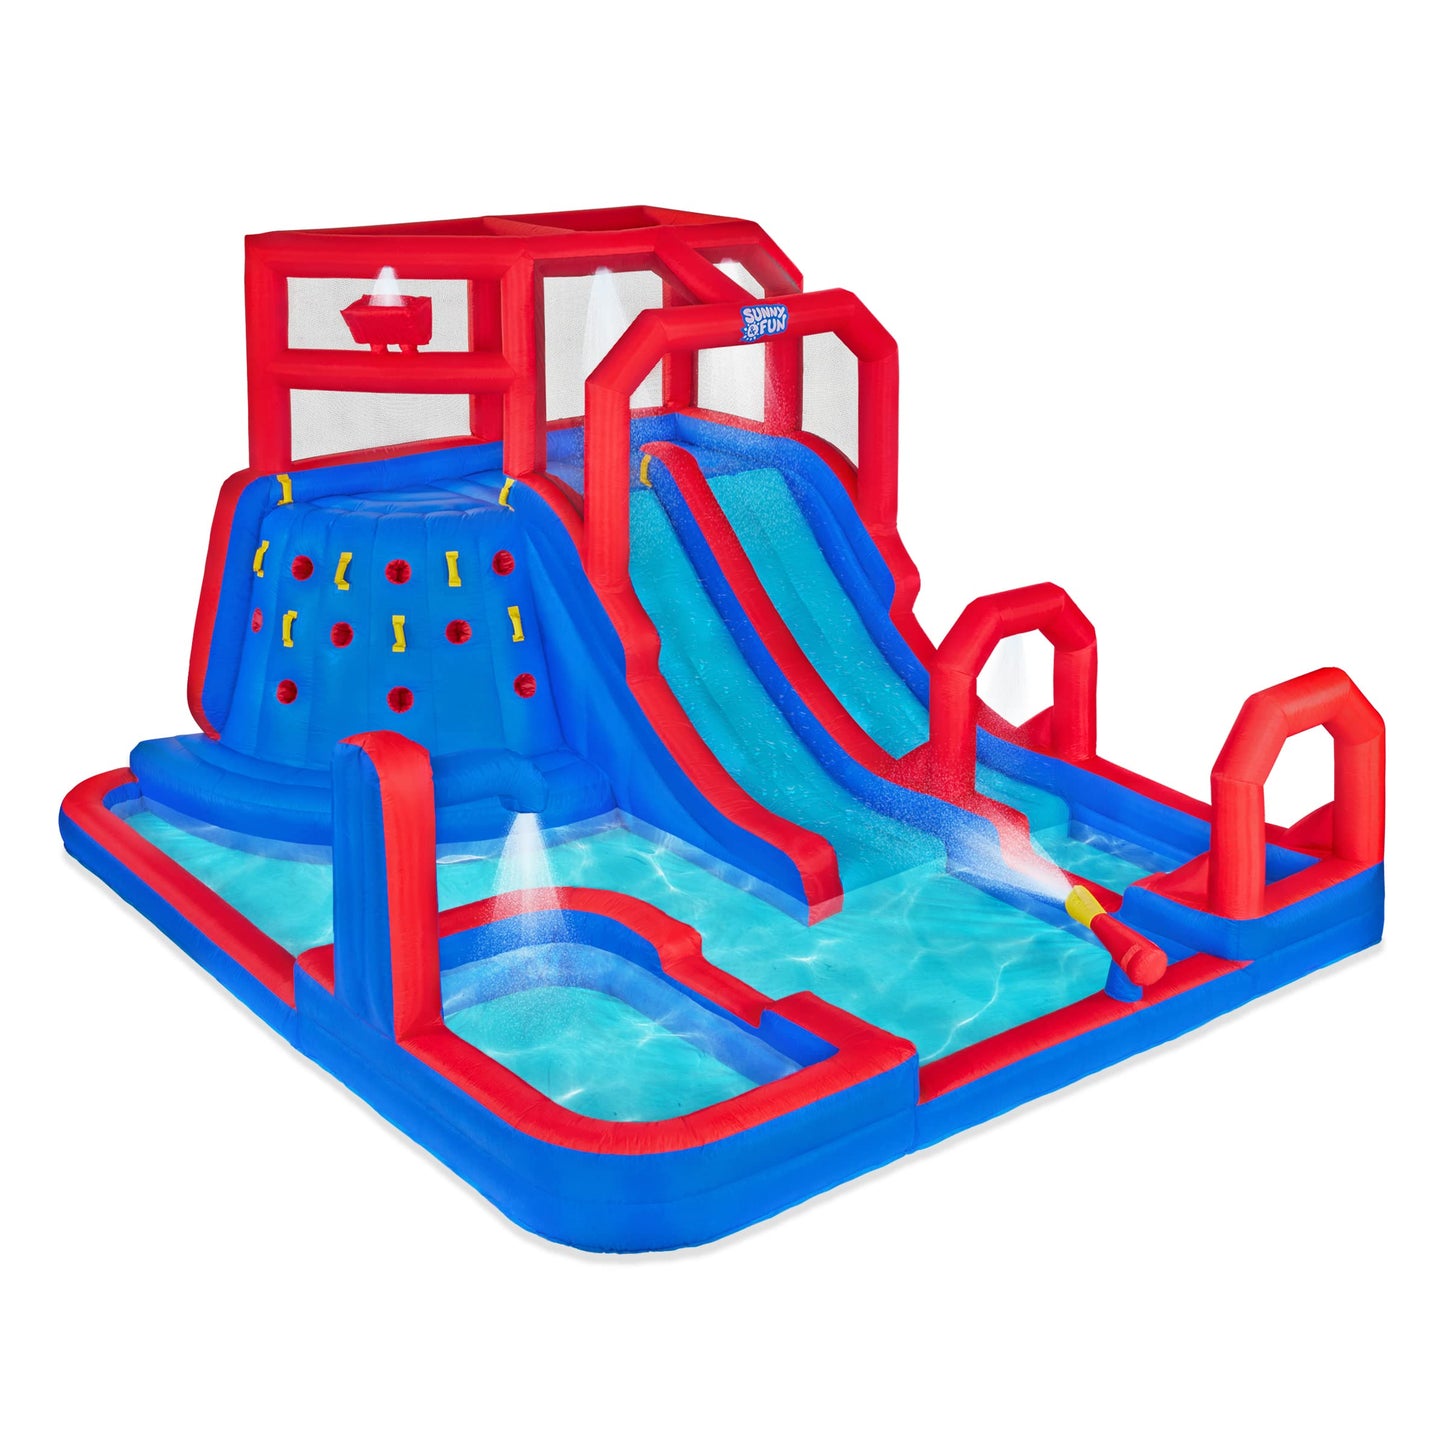 Sunny & Fun Mega Climb N’ Go Inflatable Water Slide Park – Heavy-Duty for Outdoor Fun - Climbing Wall, 2 Slides, Splash & Deep Pool – Easy to Set Up & Inflate with Included Air Pump & Carrying Case Blue/Red